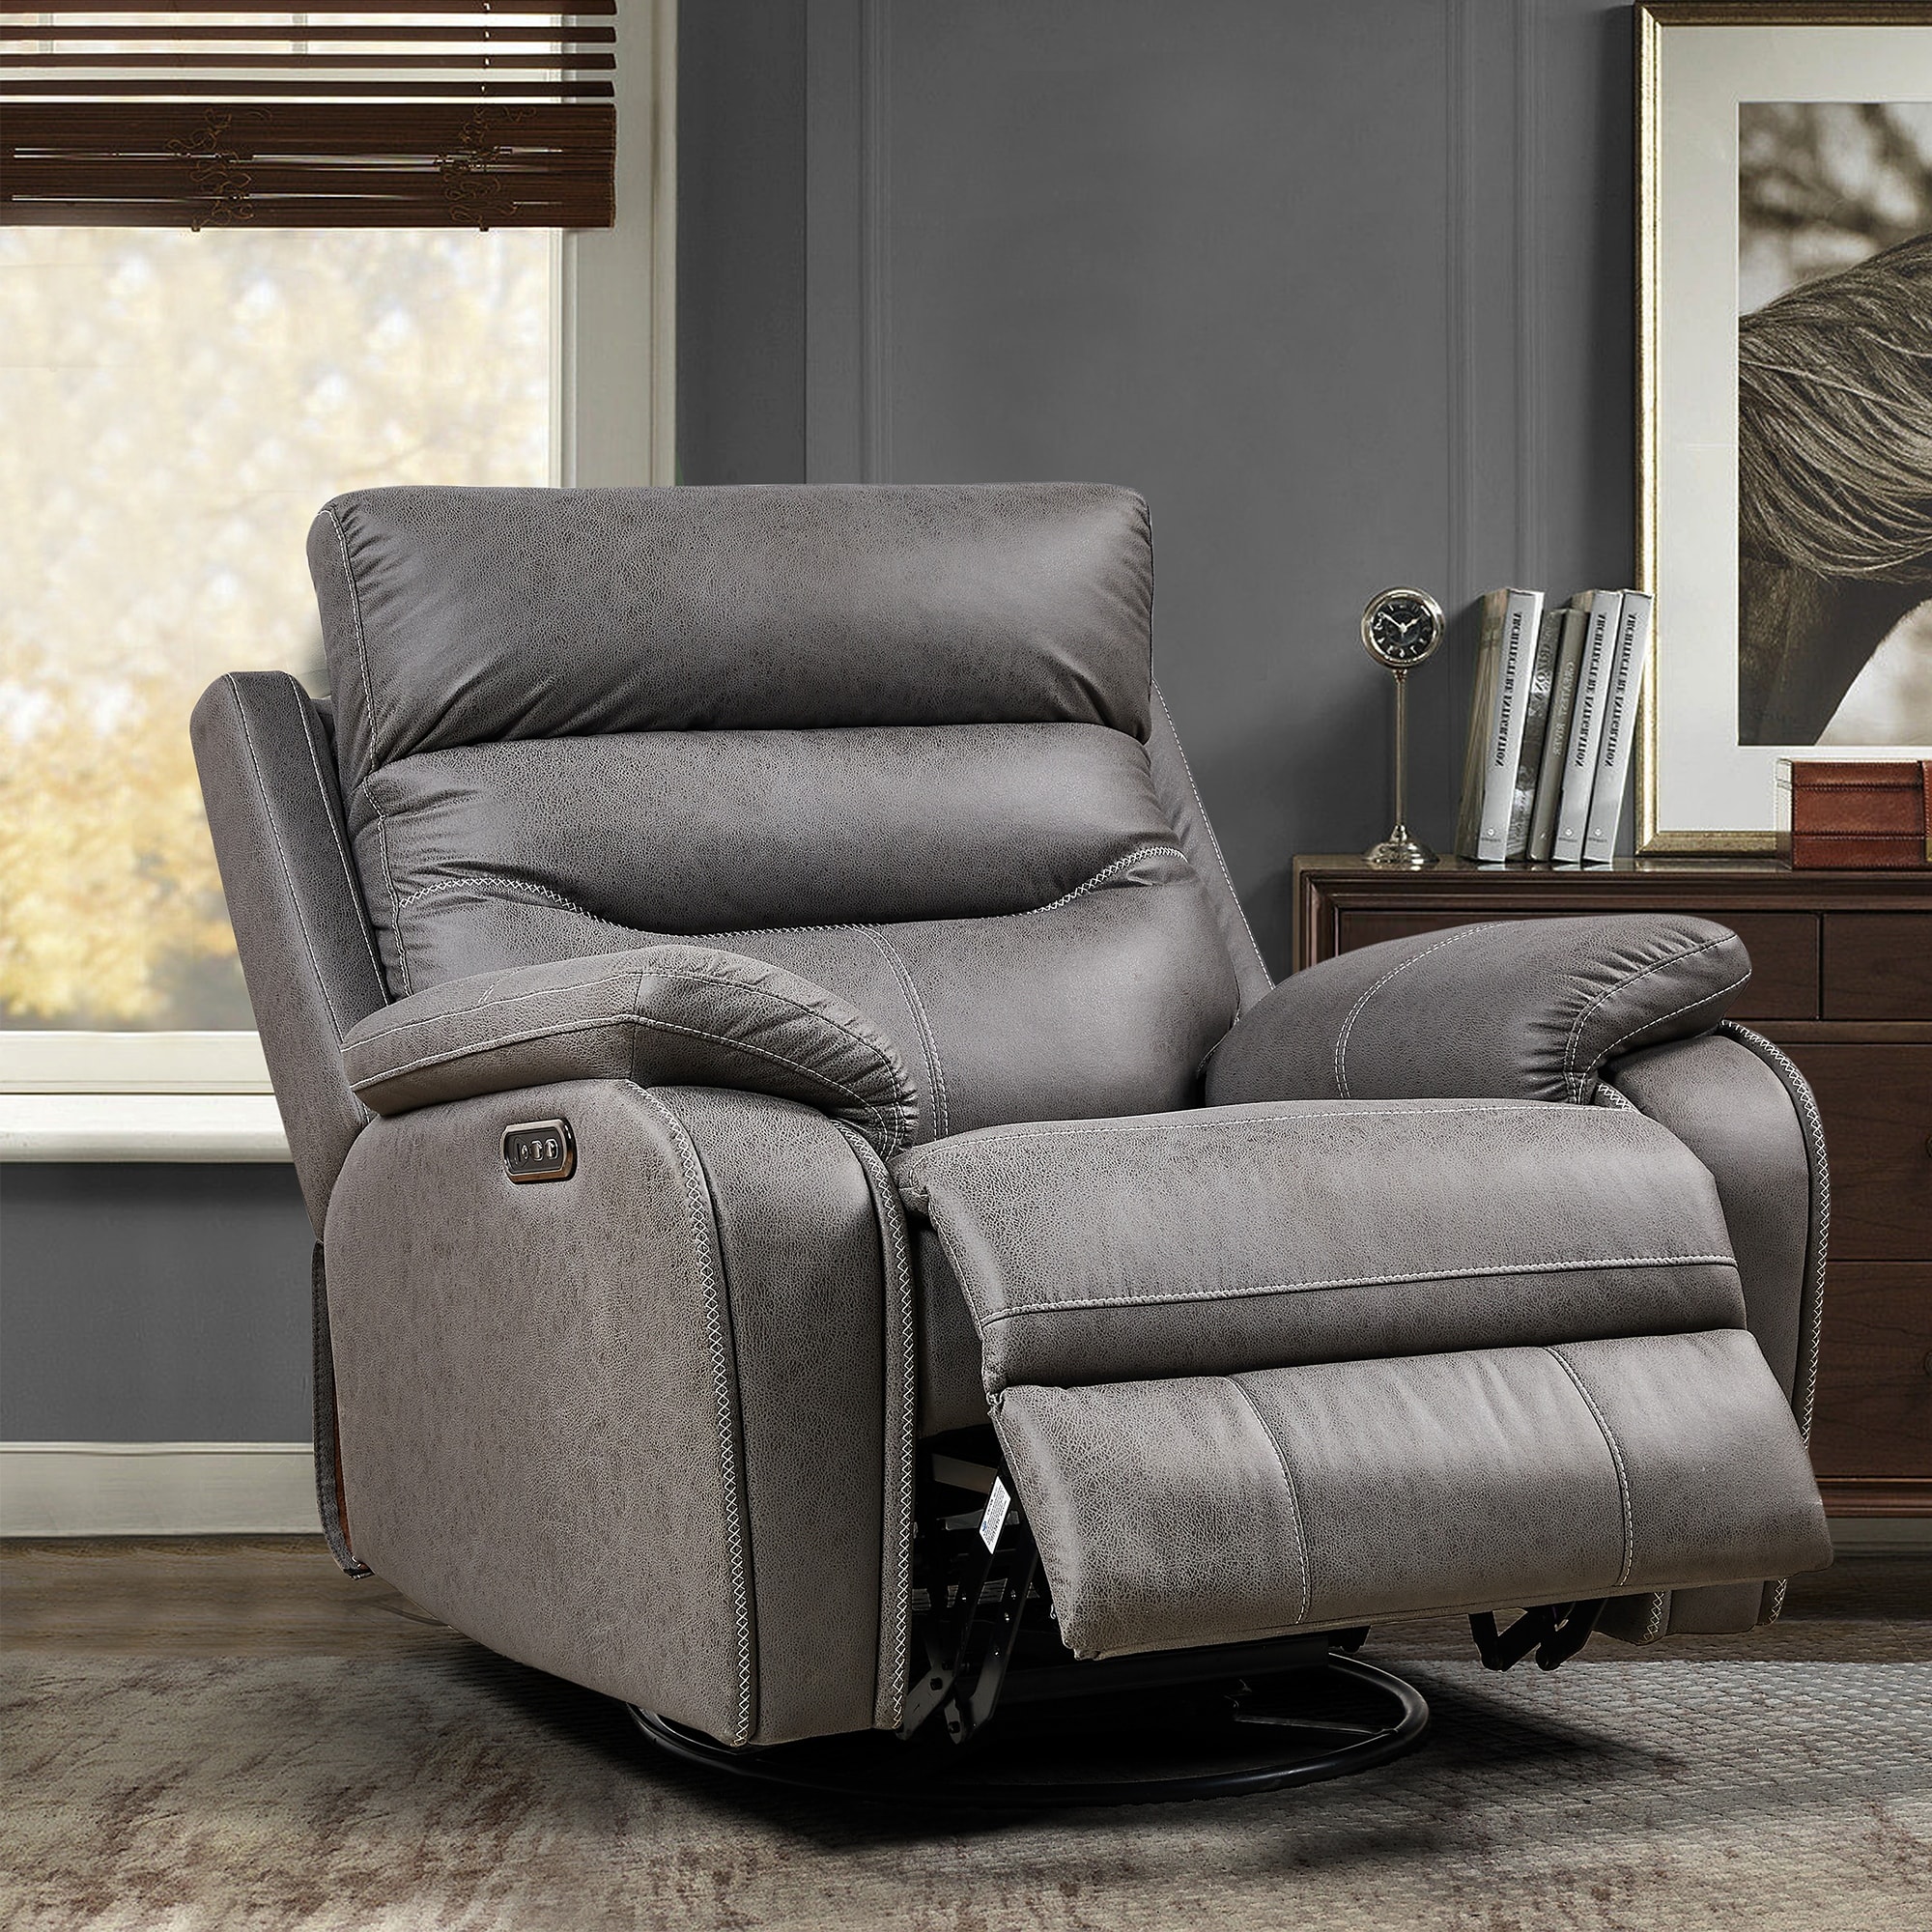 Oversized Dual Motor Rocking and 240 Degree Swivel Sofa Seat recliner Chair  Infinite Position ,Head rest with power function